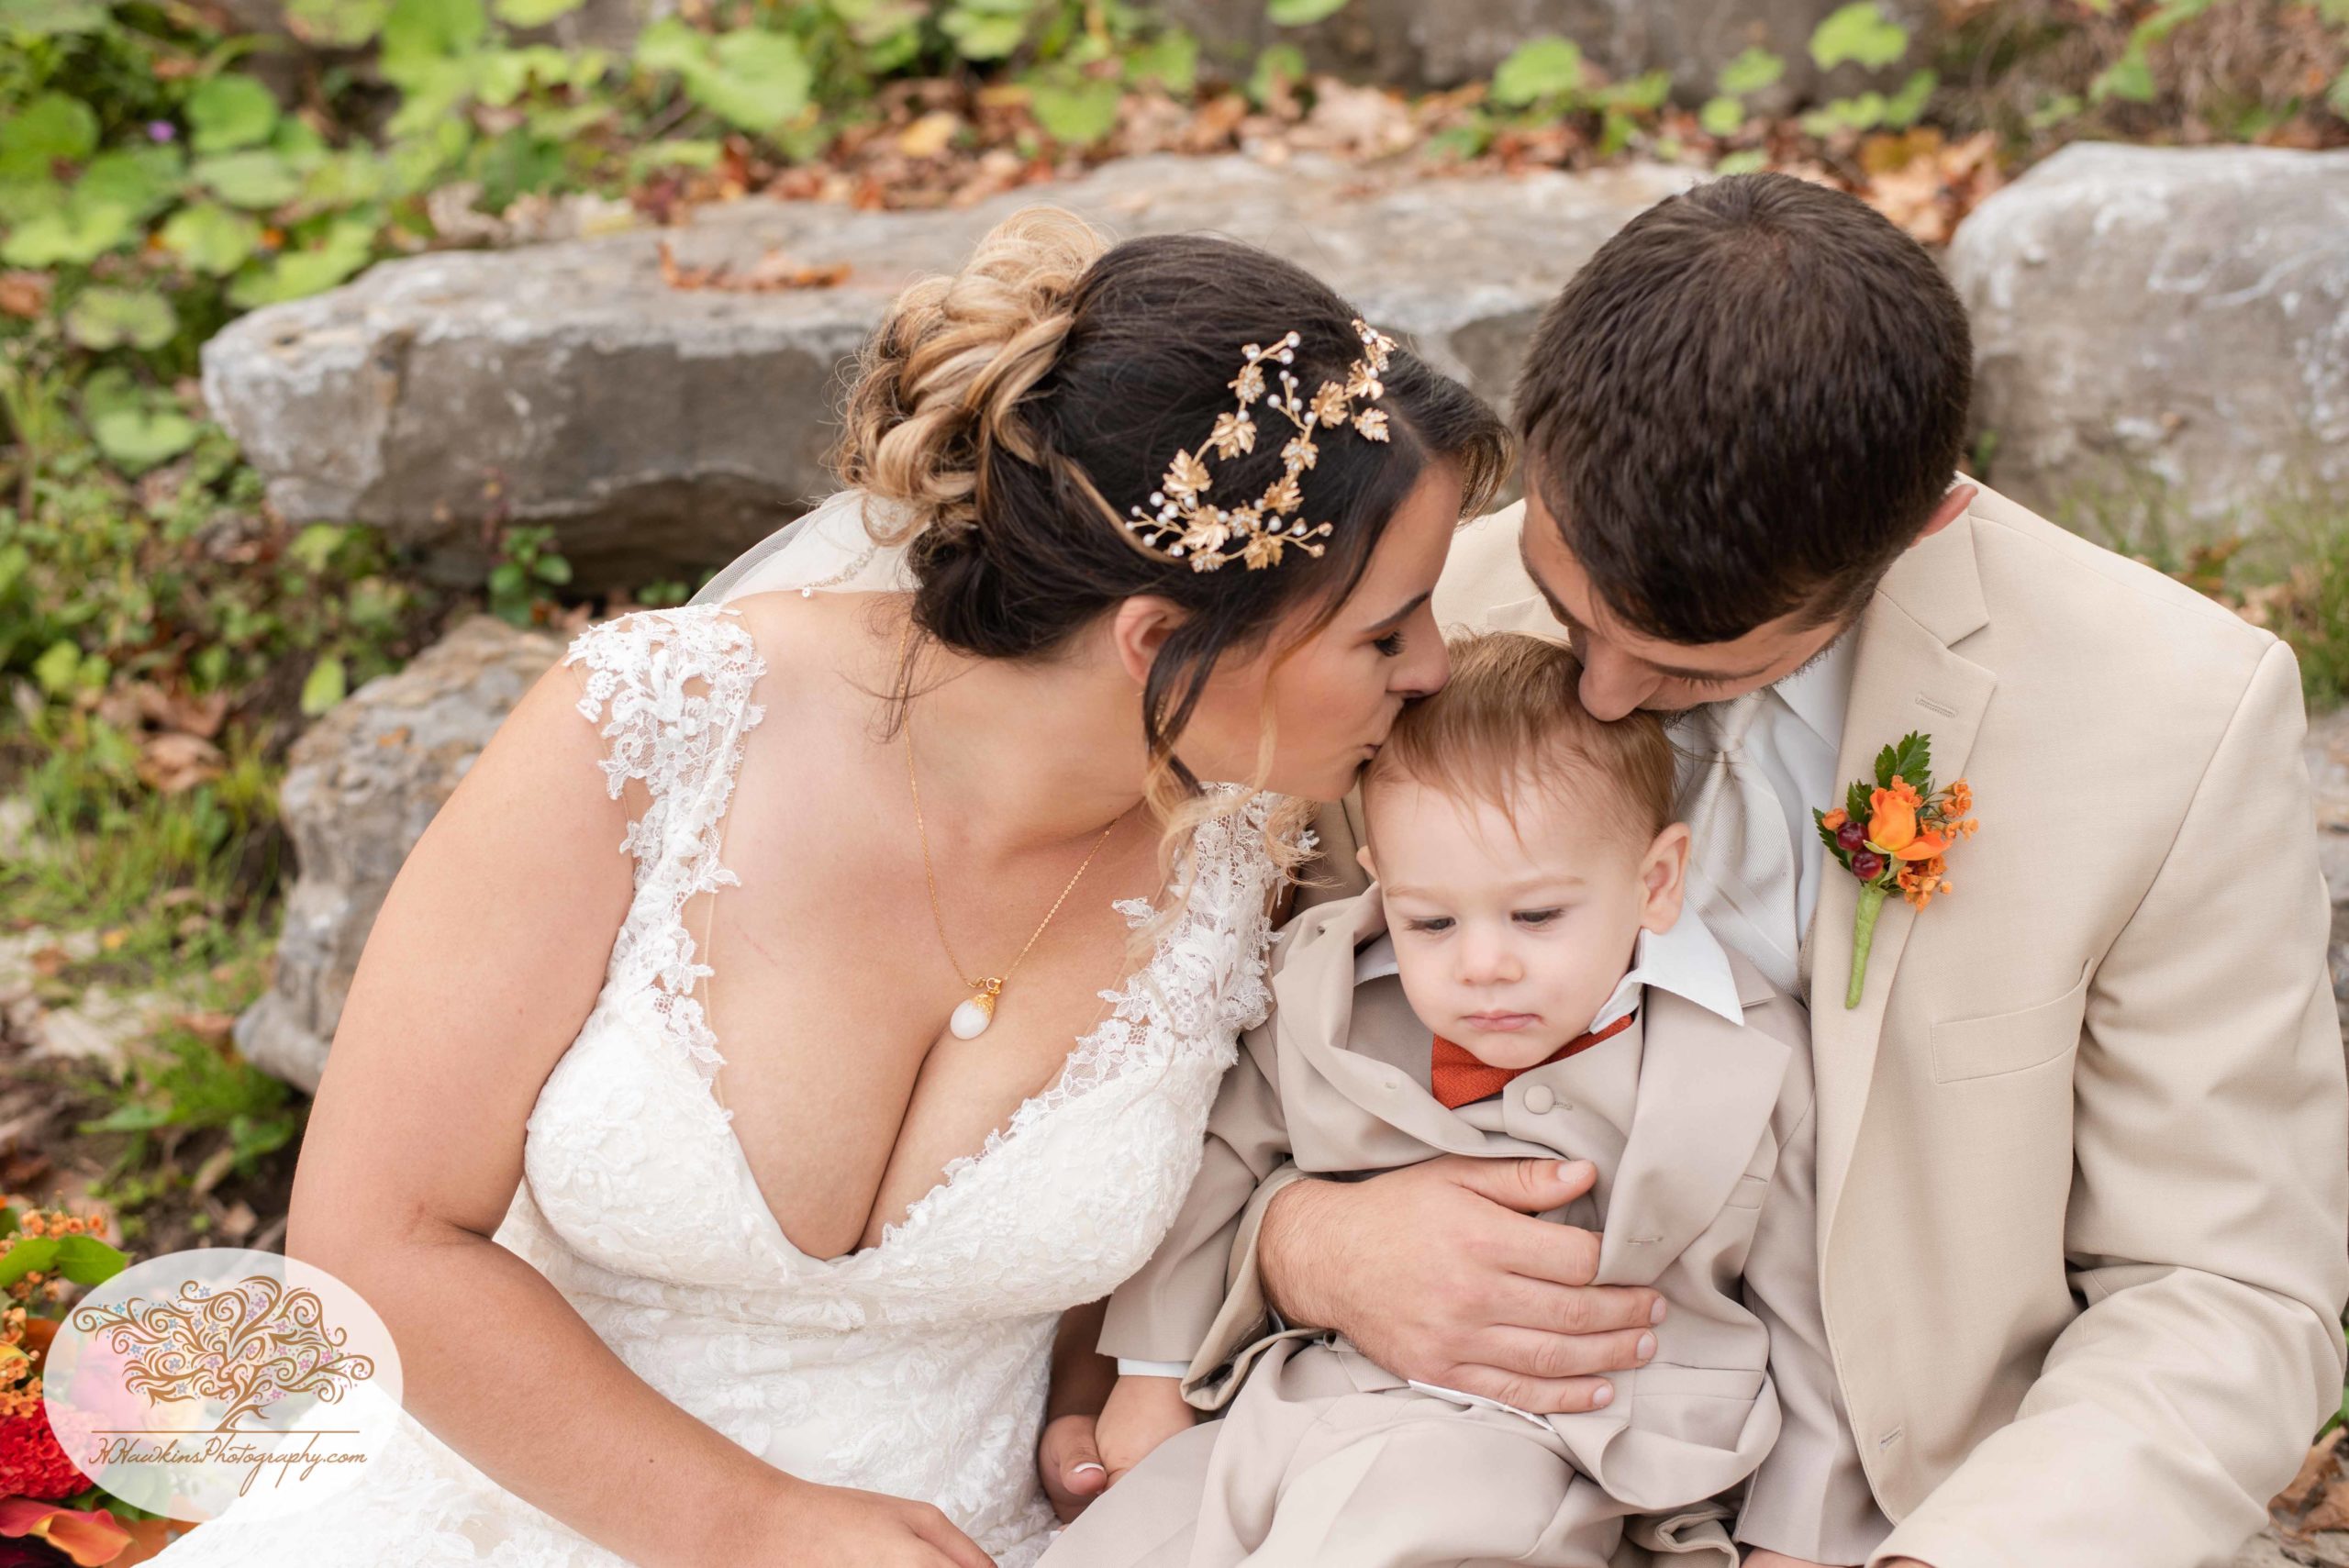 Ring bearer gets a kiss from the bride and groom on their wedding day